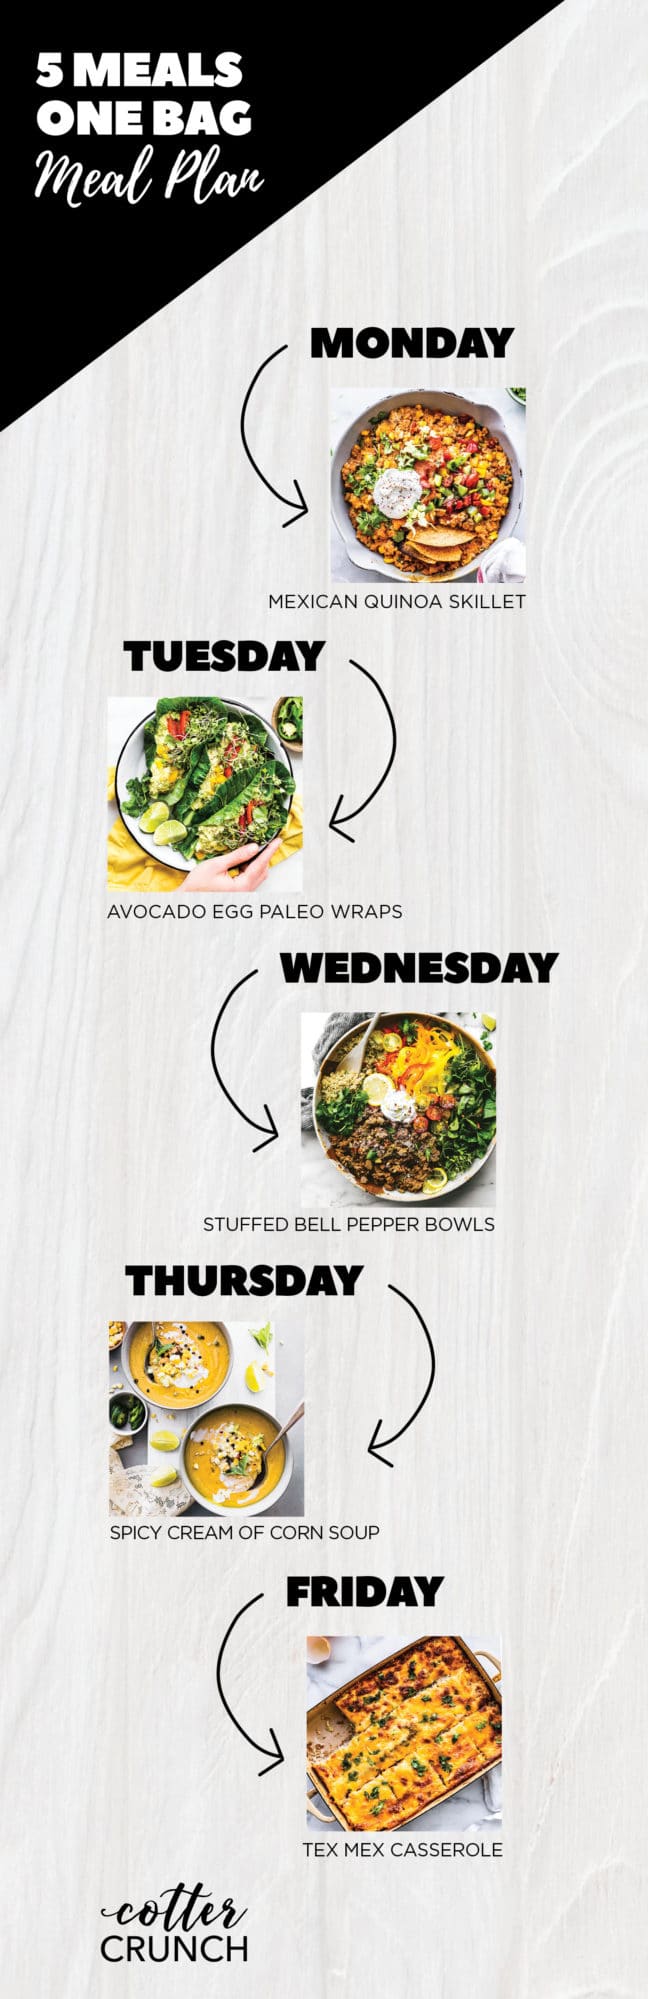 photo collage of 5 dinner meal plans made from one bag of groceries